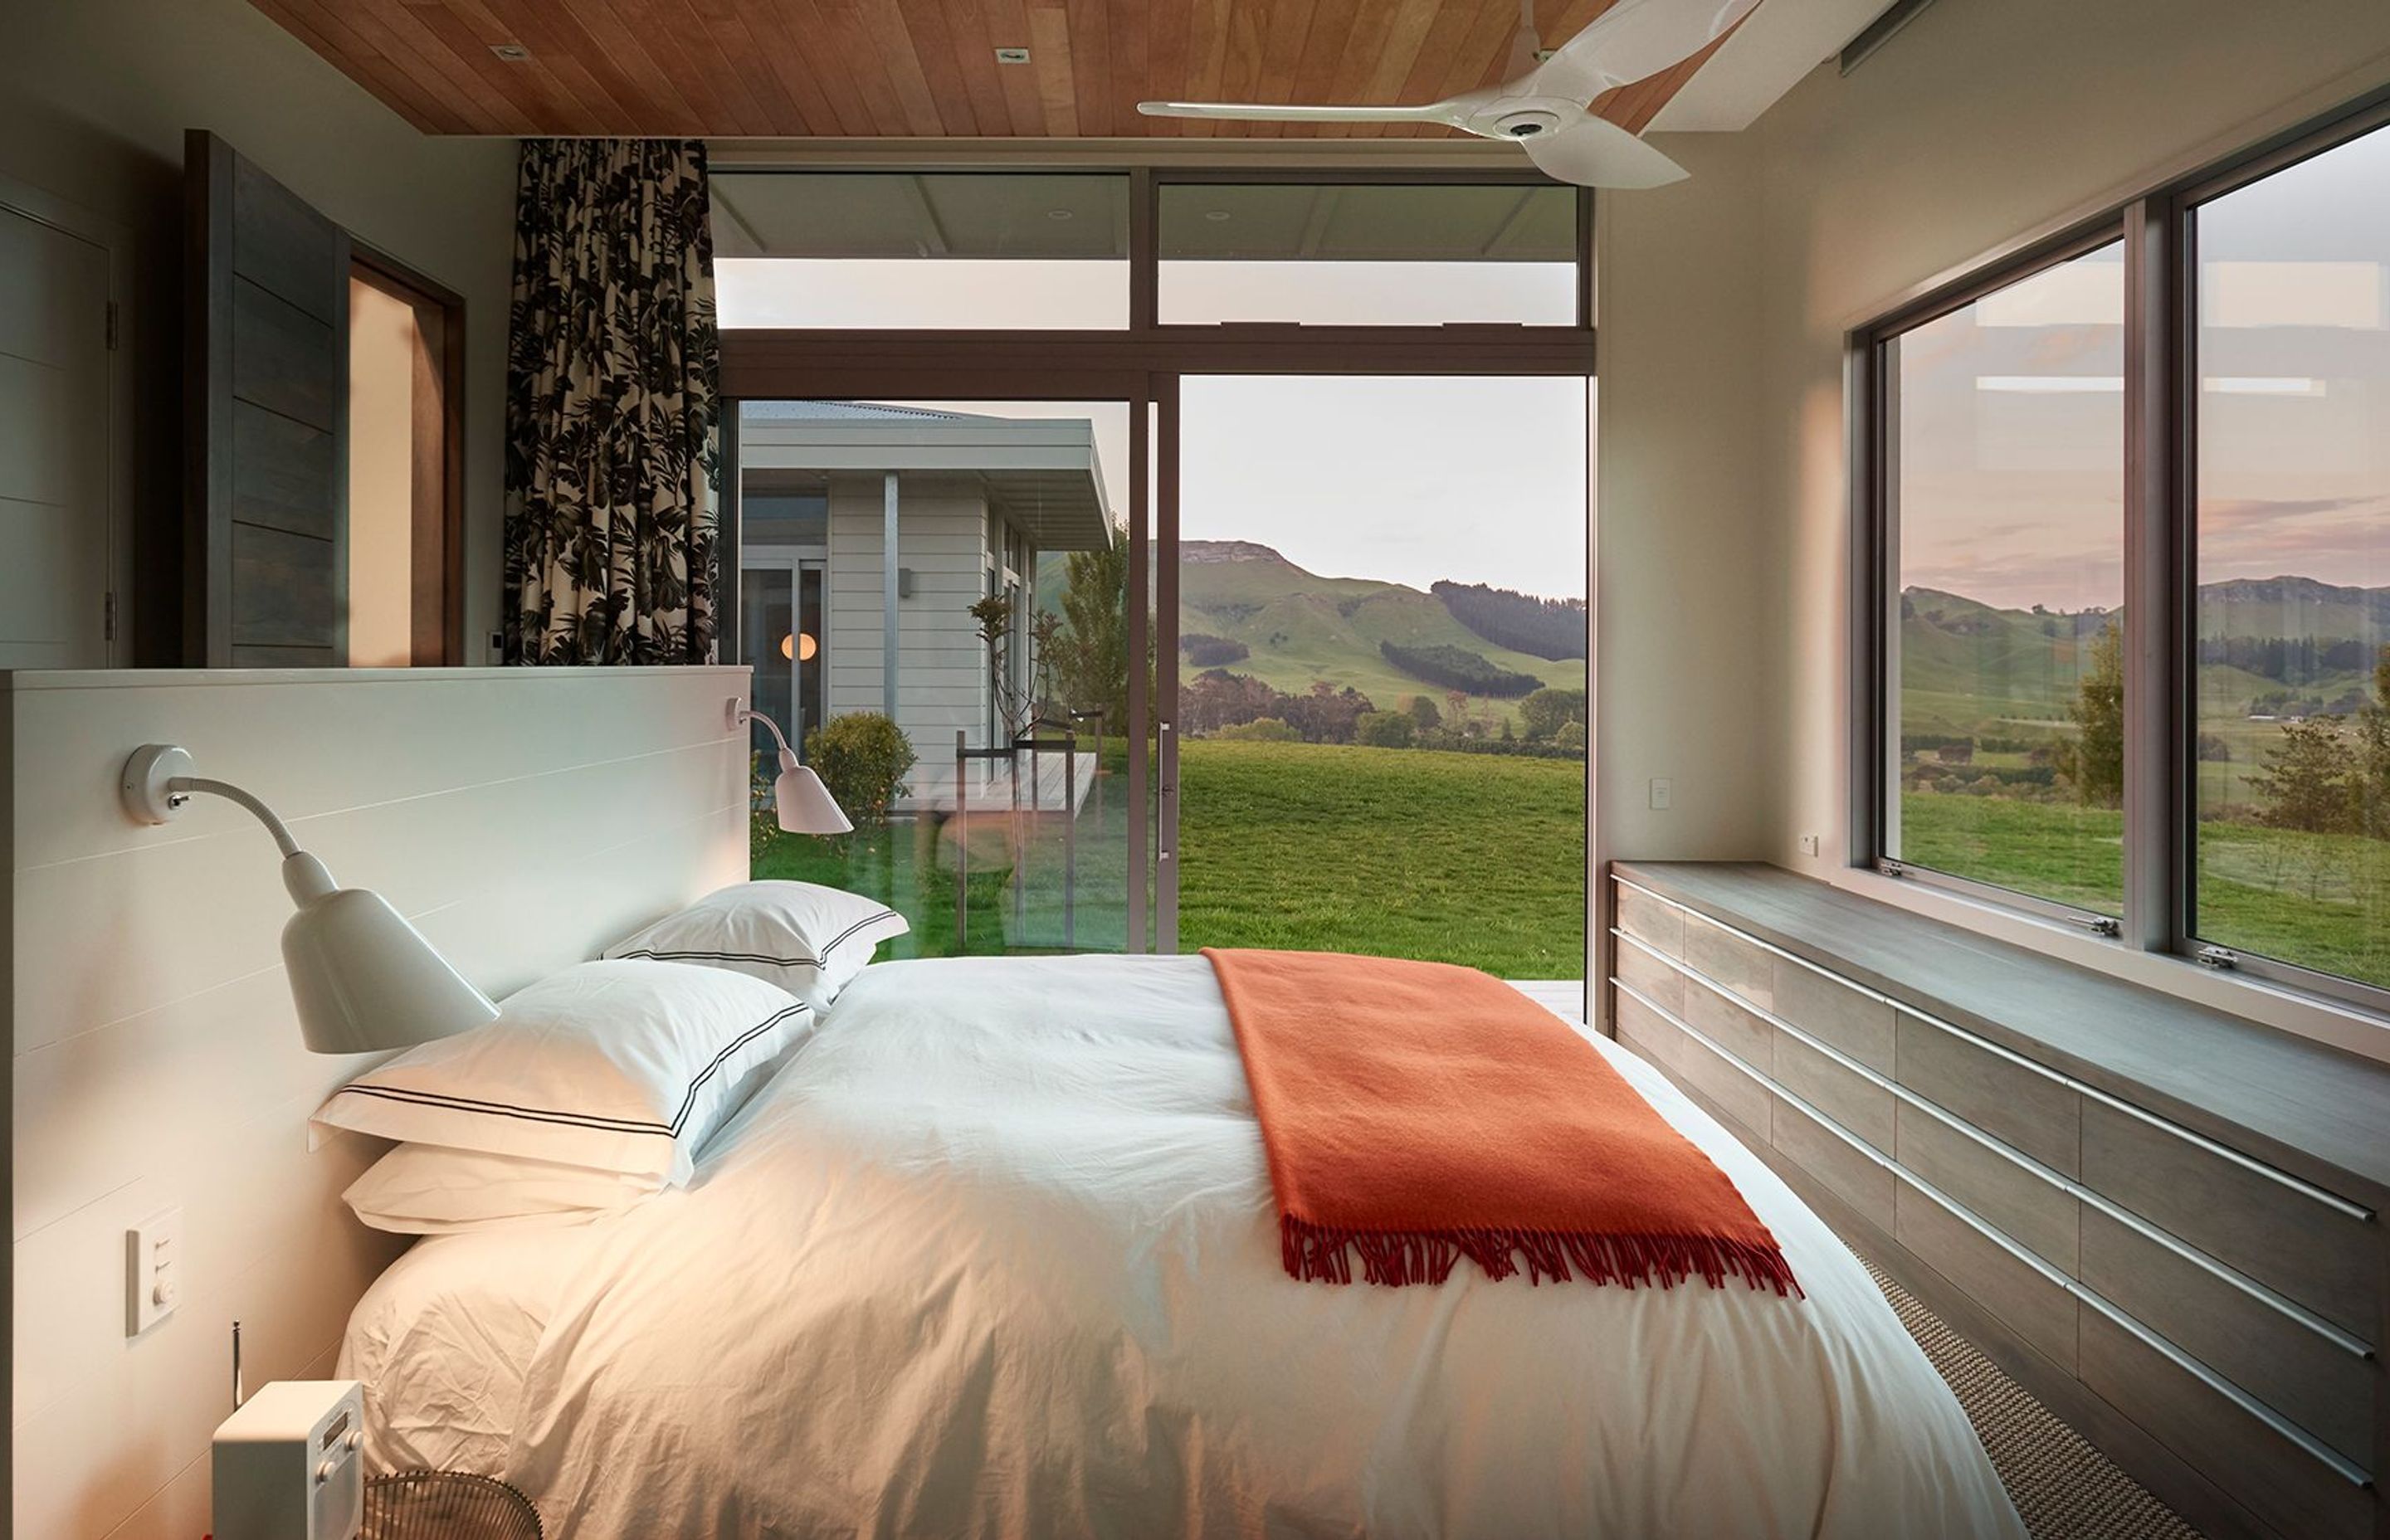 The master bedroom has a north-facing landcape view and opens up into the central courtyard area.